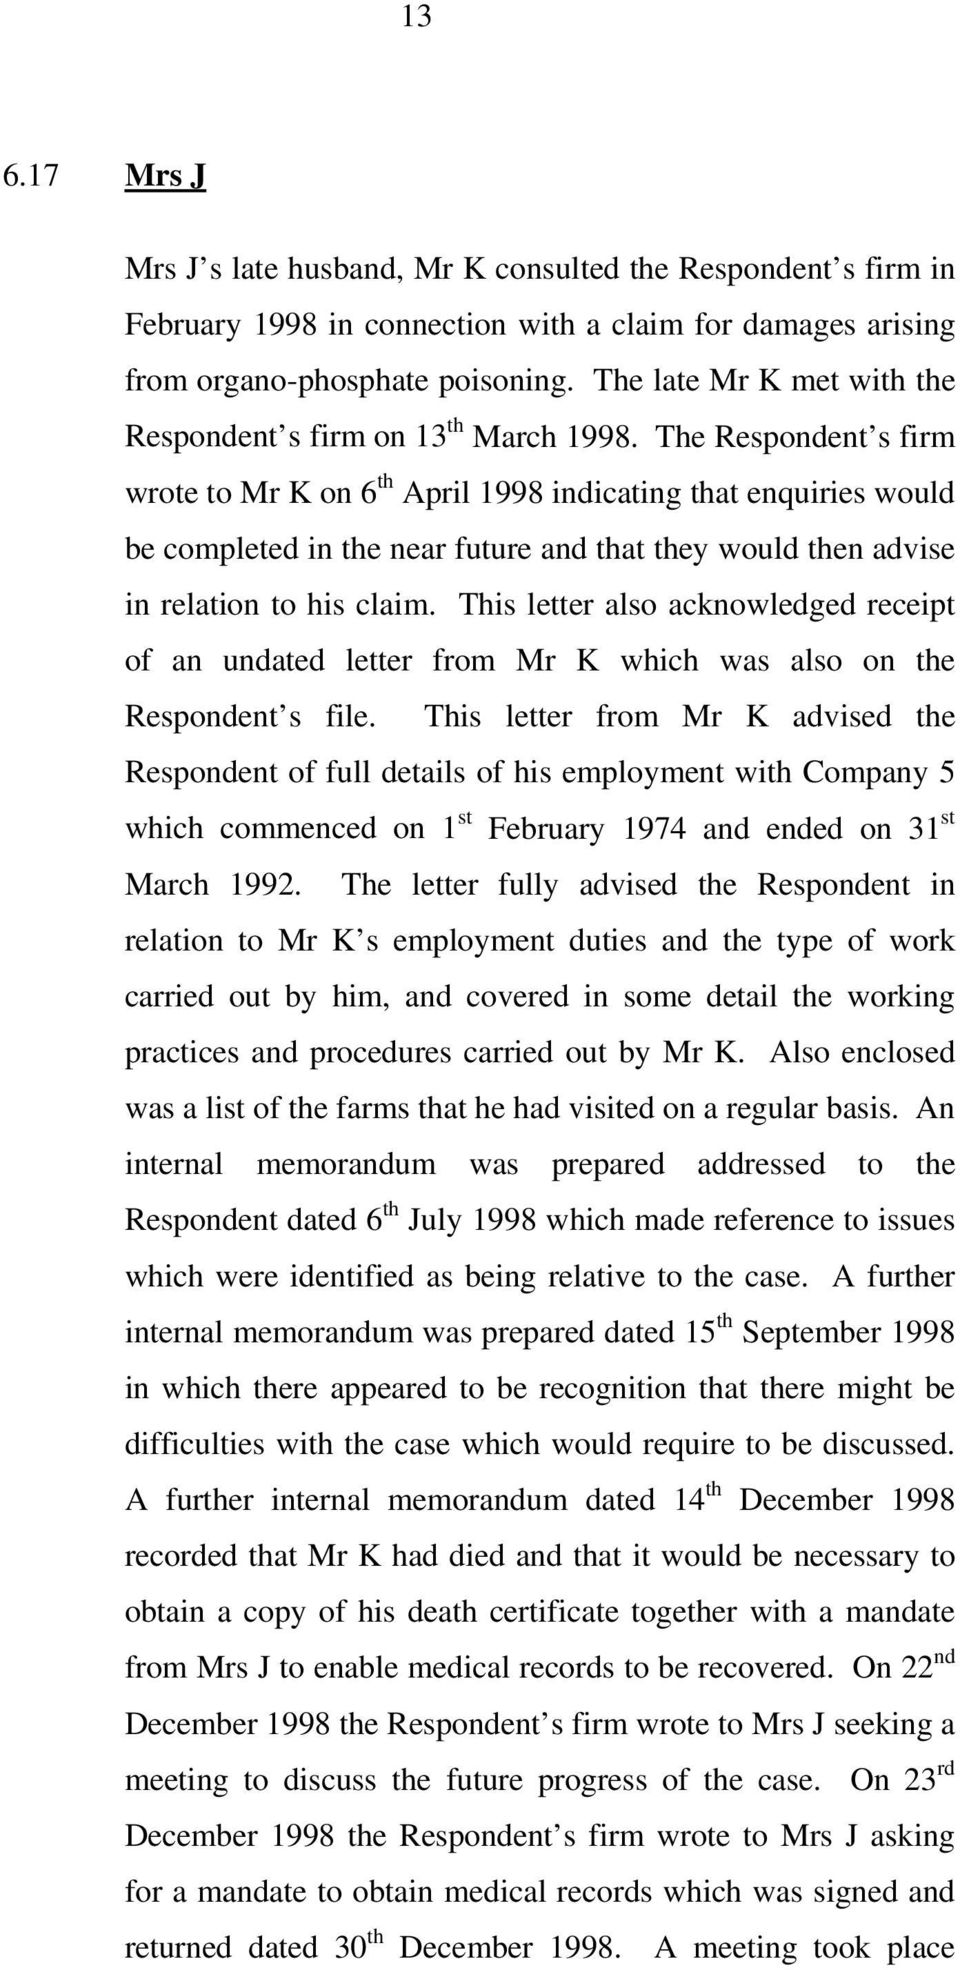 The Respondent s firm wrote to Mr K on 6 th April 1998 indicating that enquiries would be completed in the near future and that they would then advise in relation to his claim.